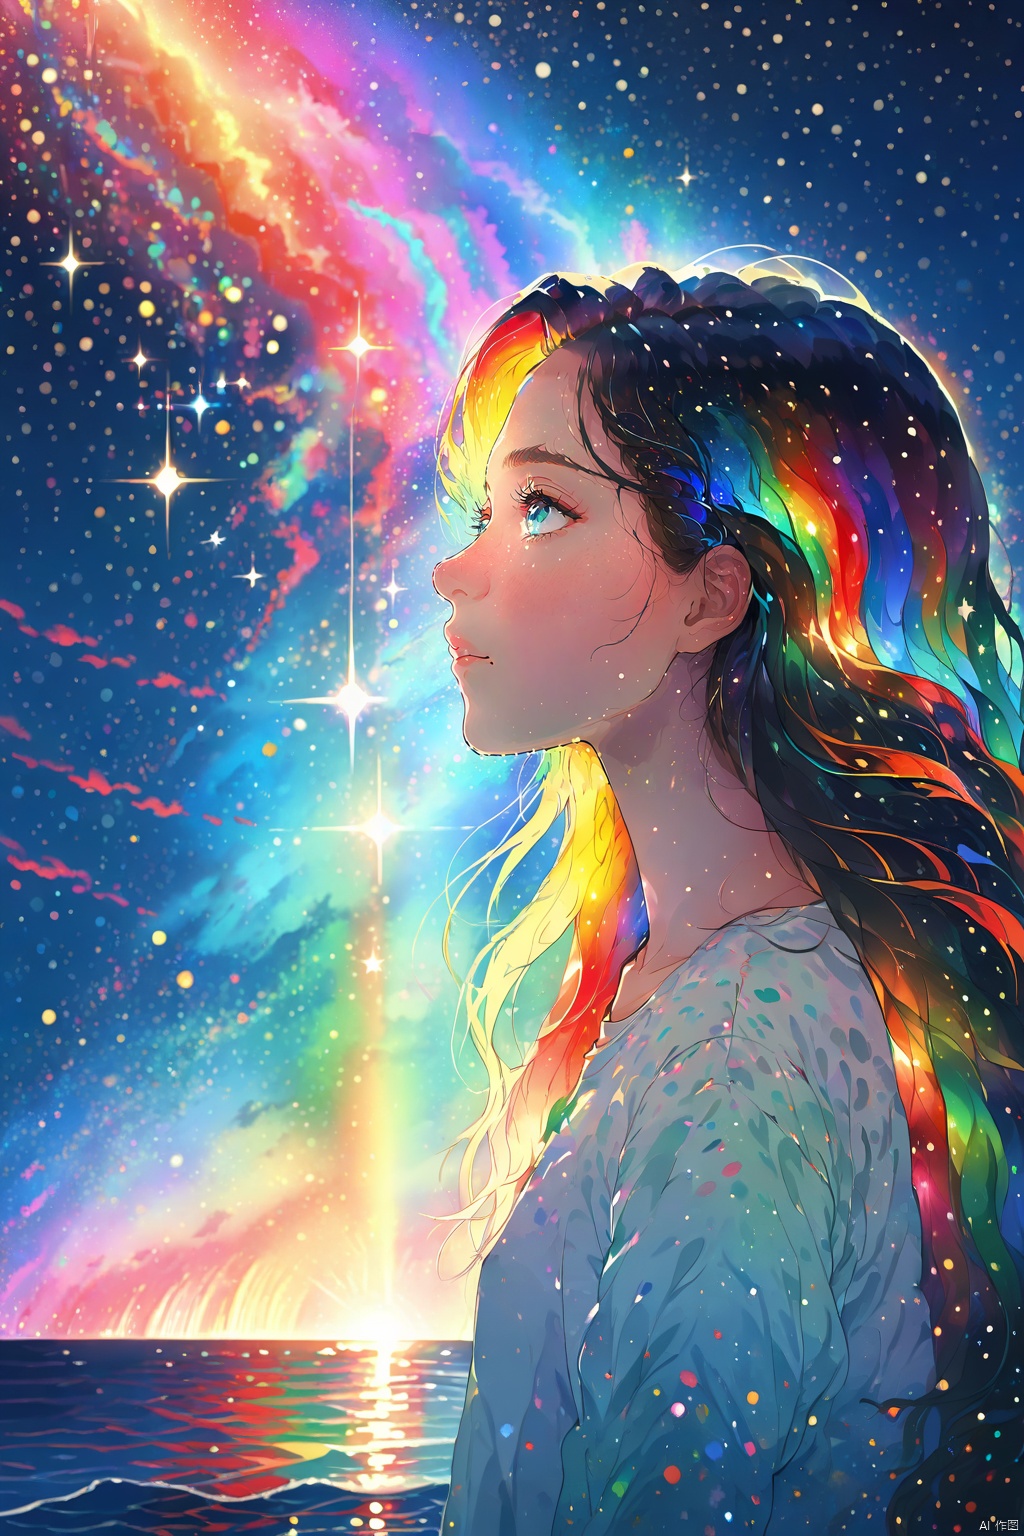  1 girl, lovely, long hair, closeup, portrait, upper body, face from left side, on the sea, under the starry sky, the sea reflects the starry sky, rainbow color light reflected on the girl's face, sparkling lights, magical atmosphere, pointillism, Silhouette view, Cosmic wonders, Mysterious and colorful, nebula light, cosmic light, galactic light, Astronomical view, Macroscopic perspective, perspective view, masterpiece,